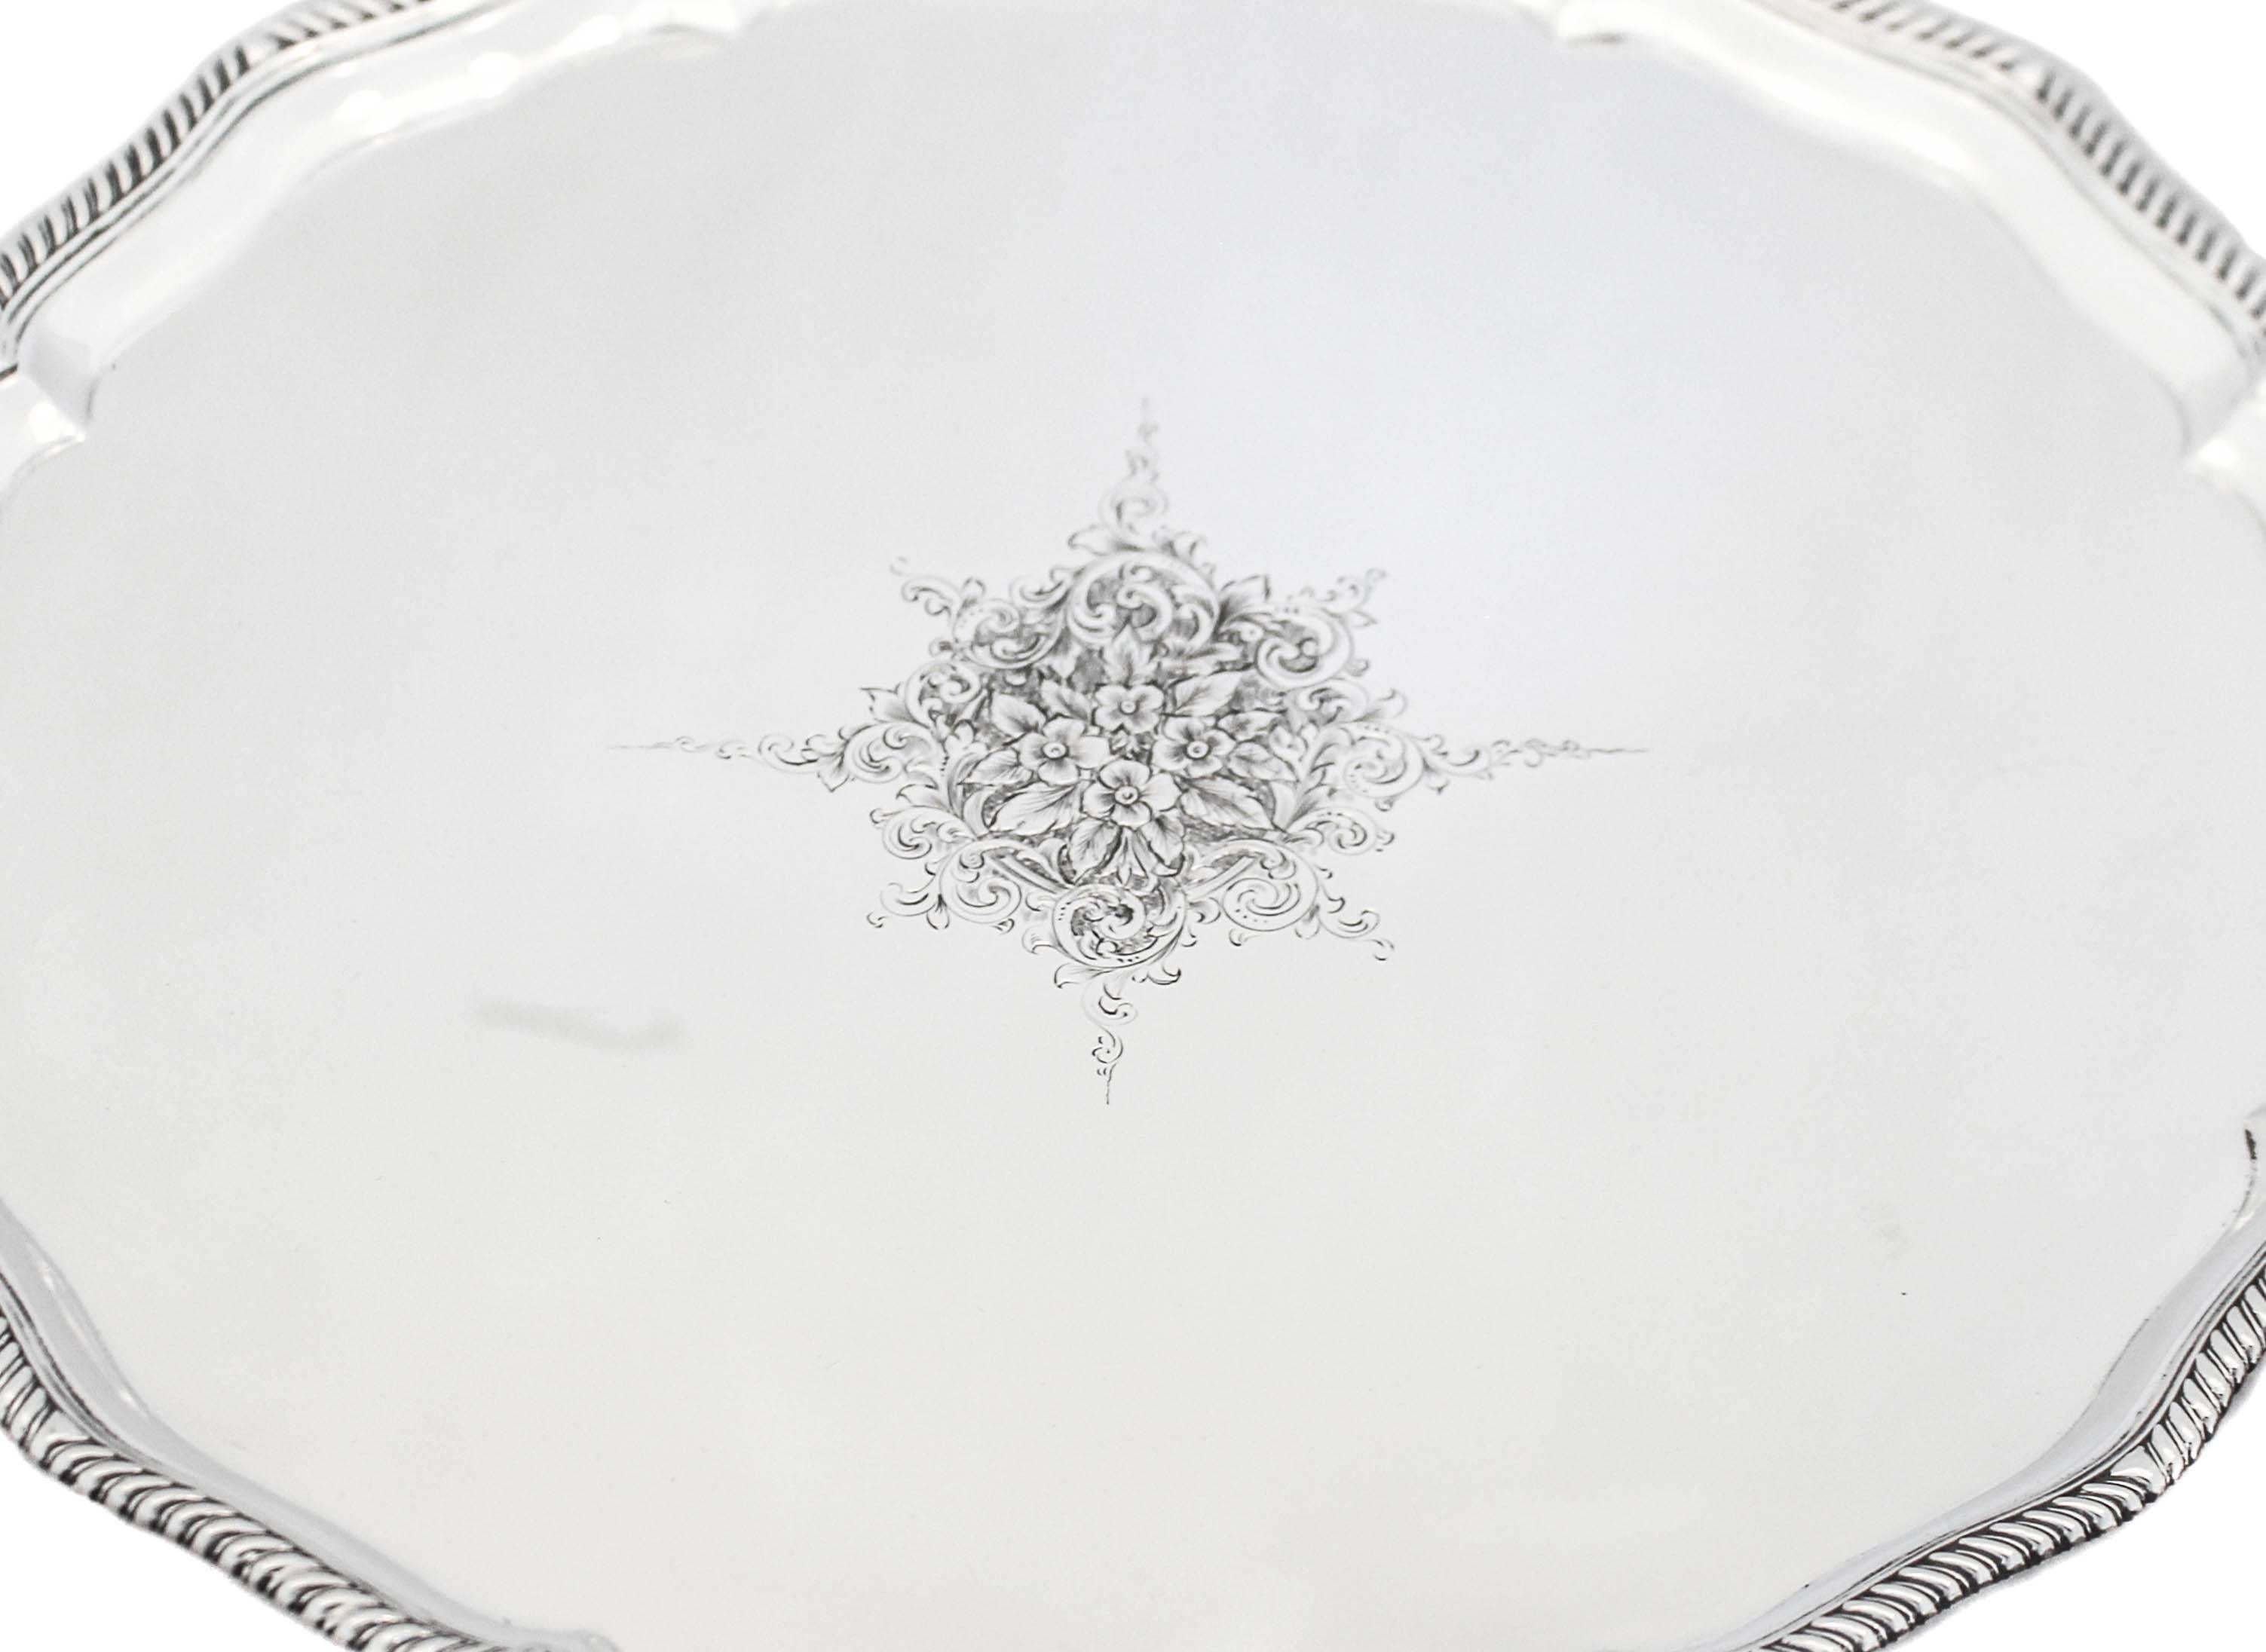 We are proud to offer you this sterling silver salver, hallmarked London 1865.  It stands on four lion paws and has a gadroon wrapping around the scalloped rim.  In the center there is a beautifully etched cluster of flowers design.  This piece can